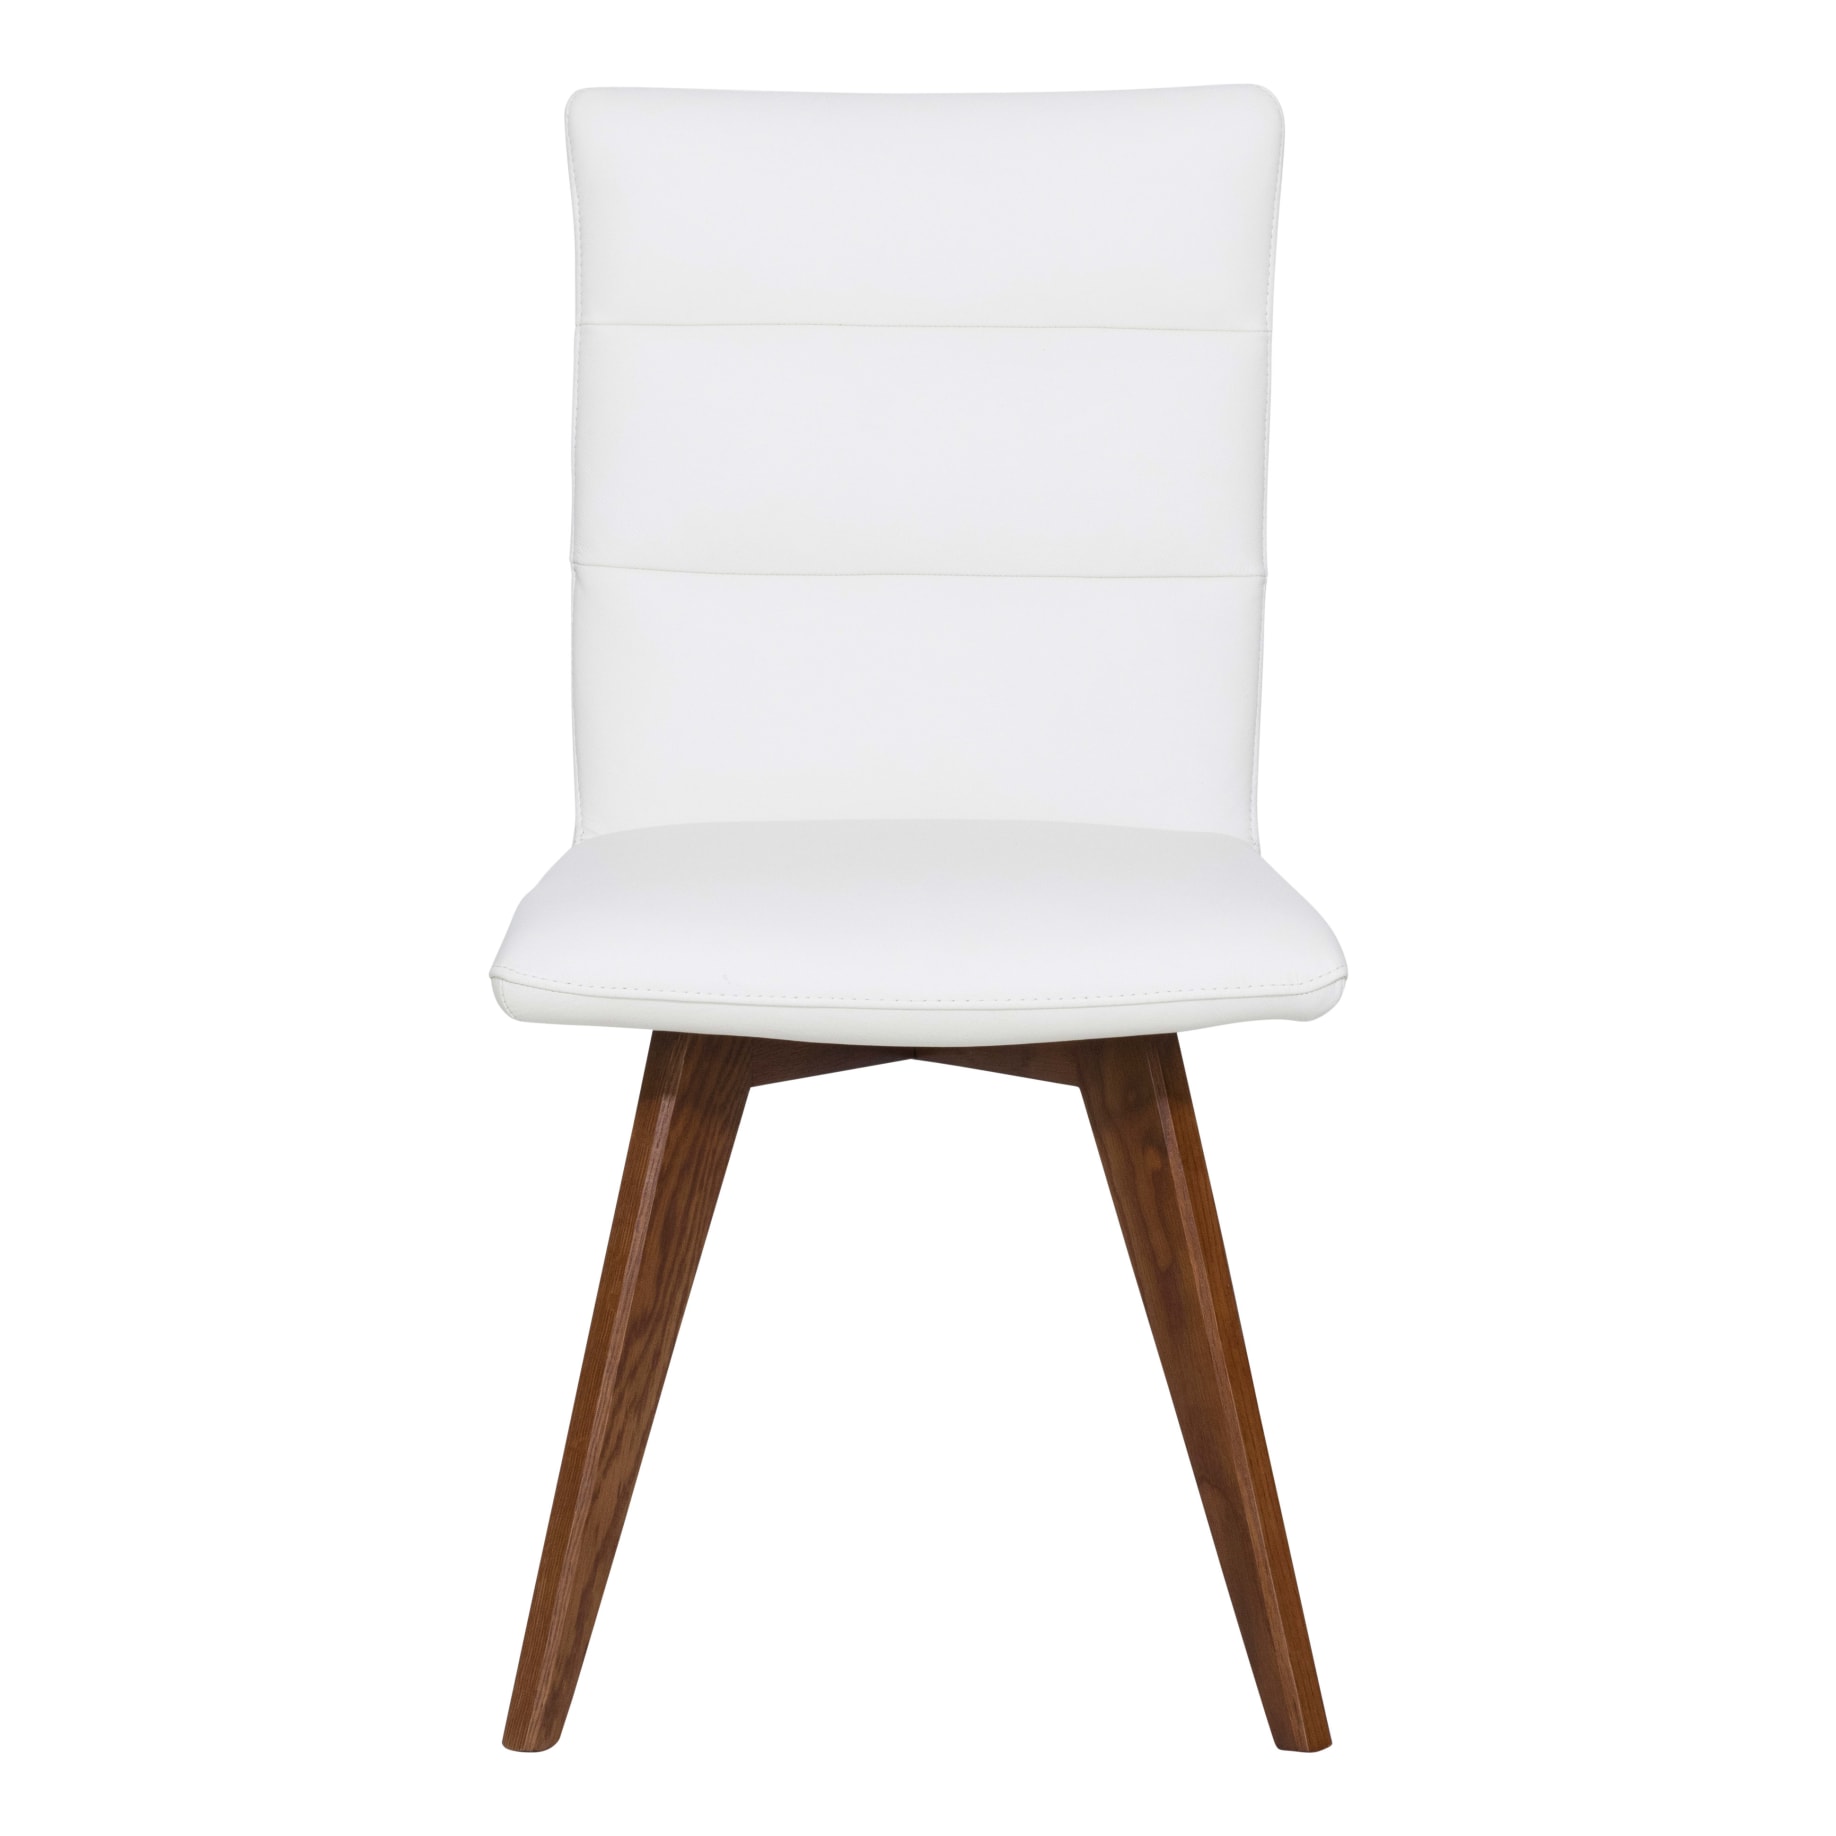 Hudson Dining Chair in White /Blackwood Stain